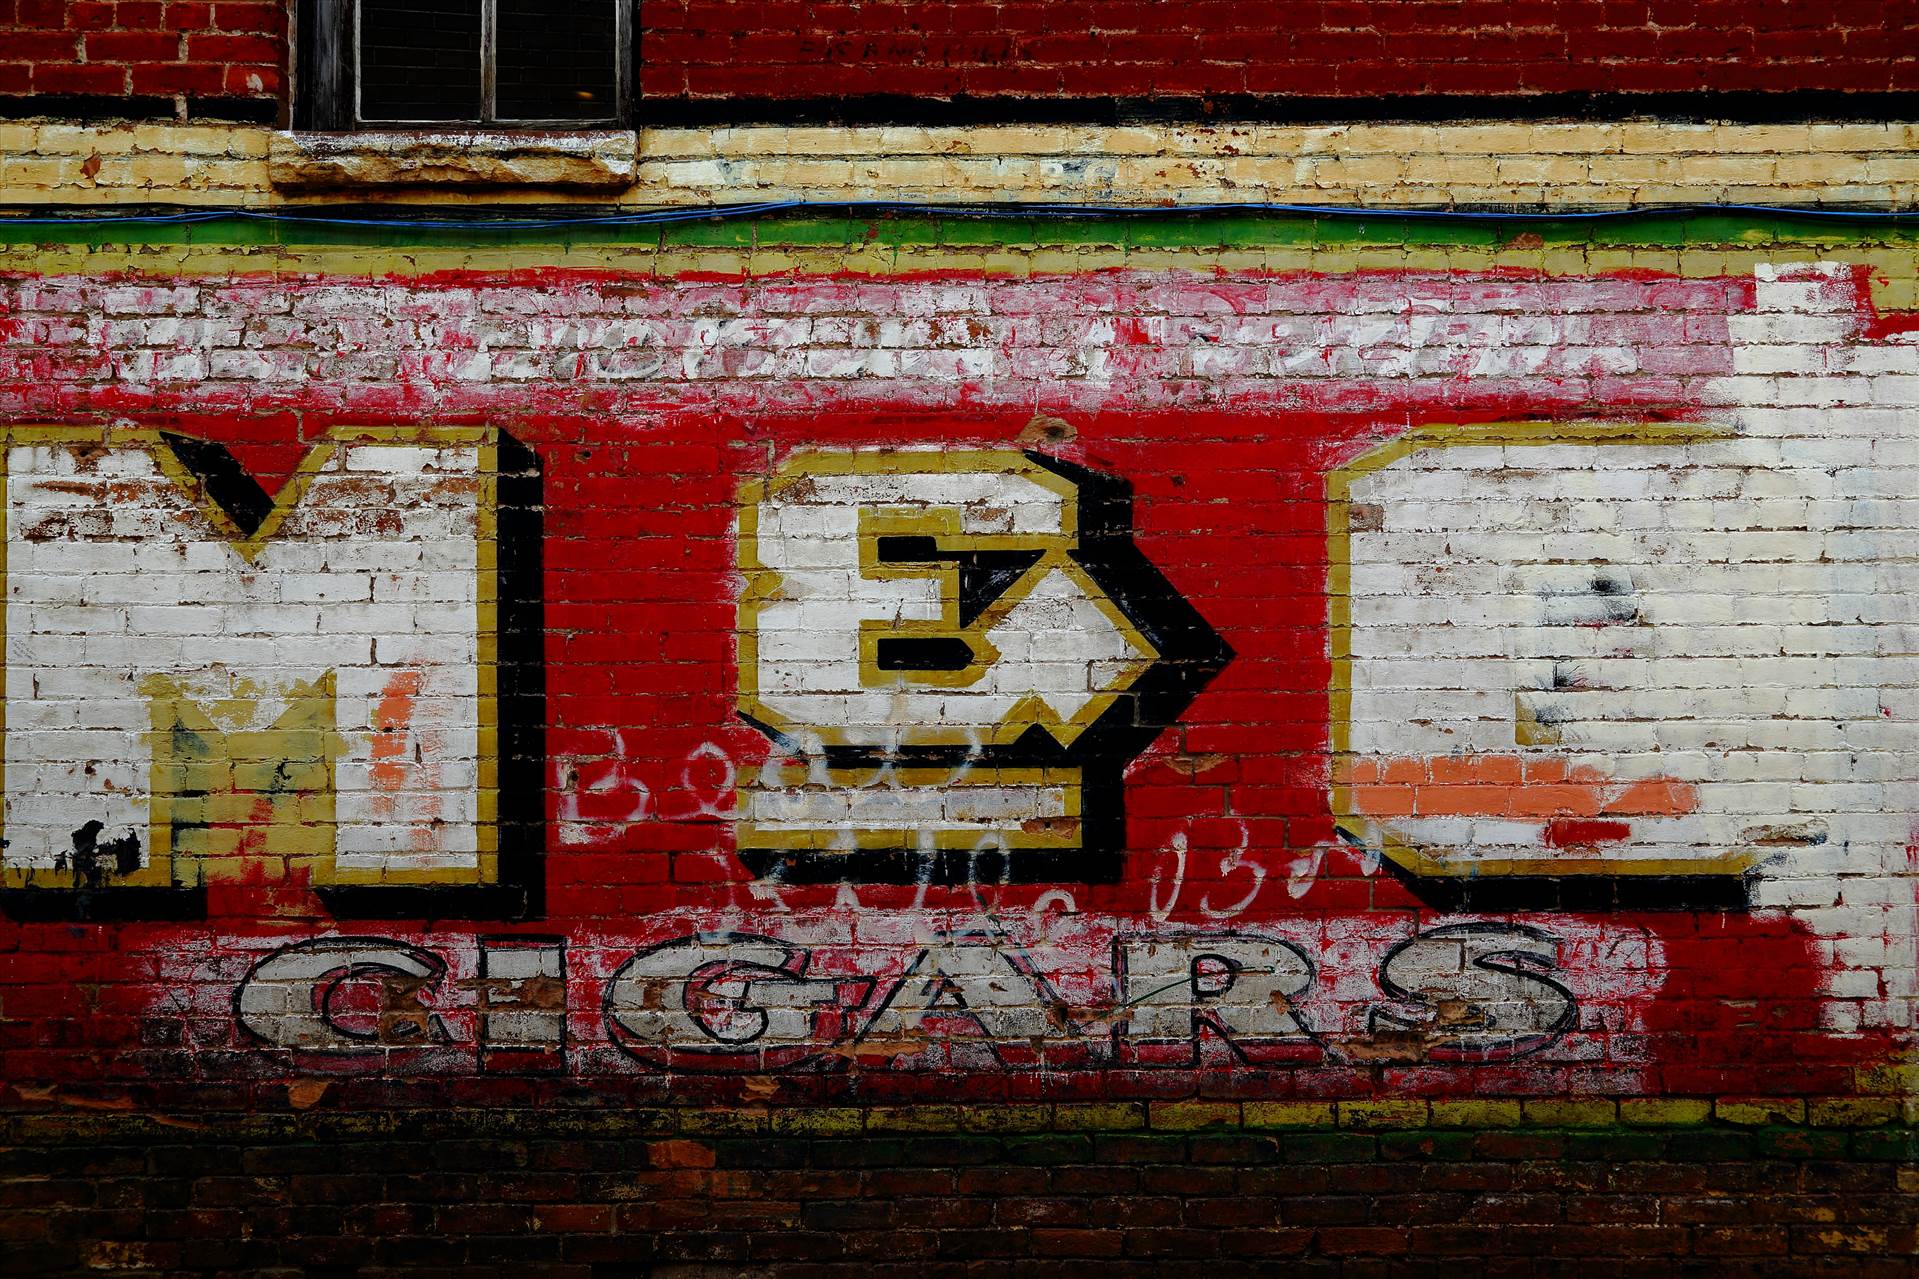 Old Signage in Alley - An alley in Glenwood Springs, CO by Scott Smith Photos